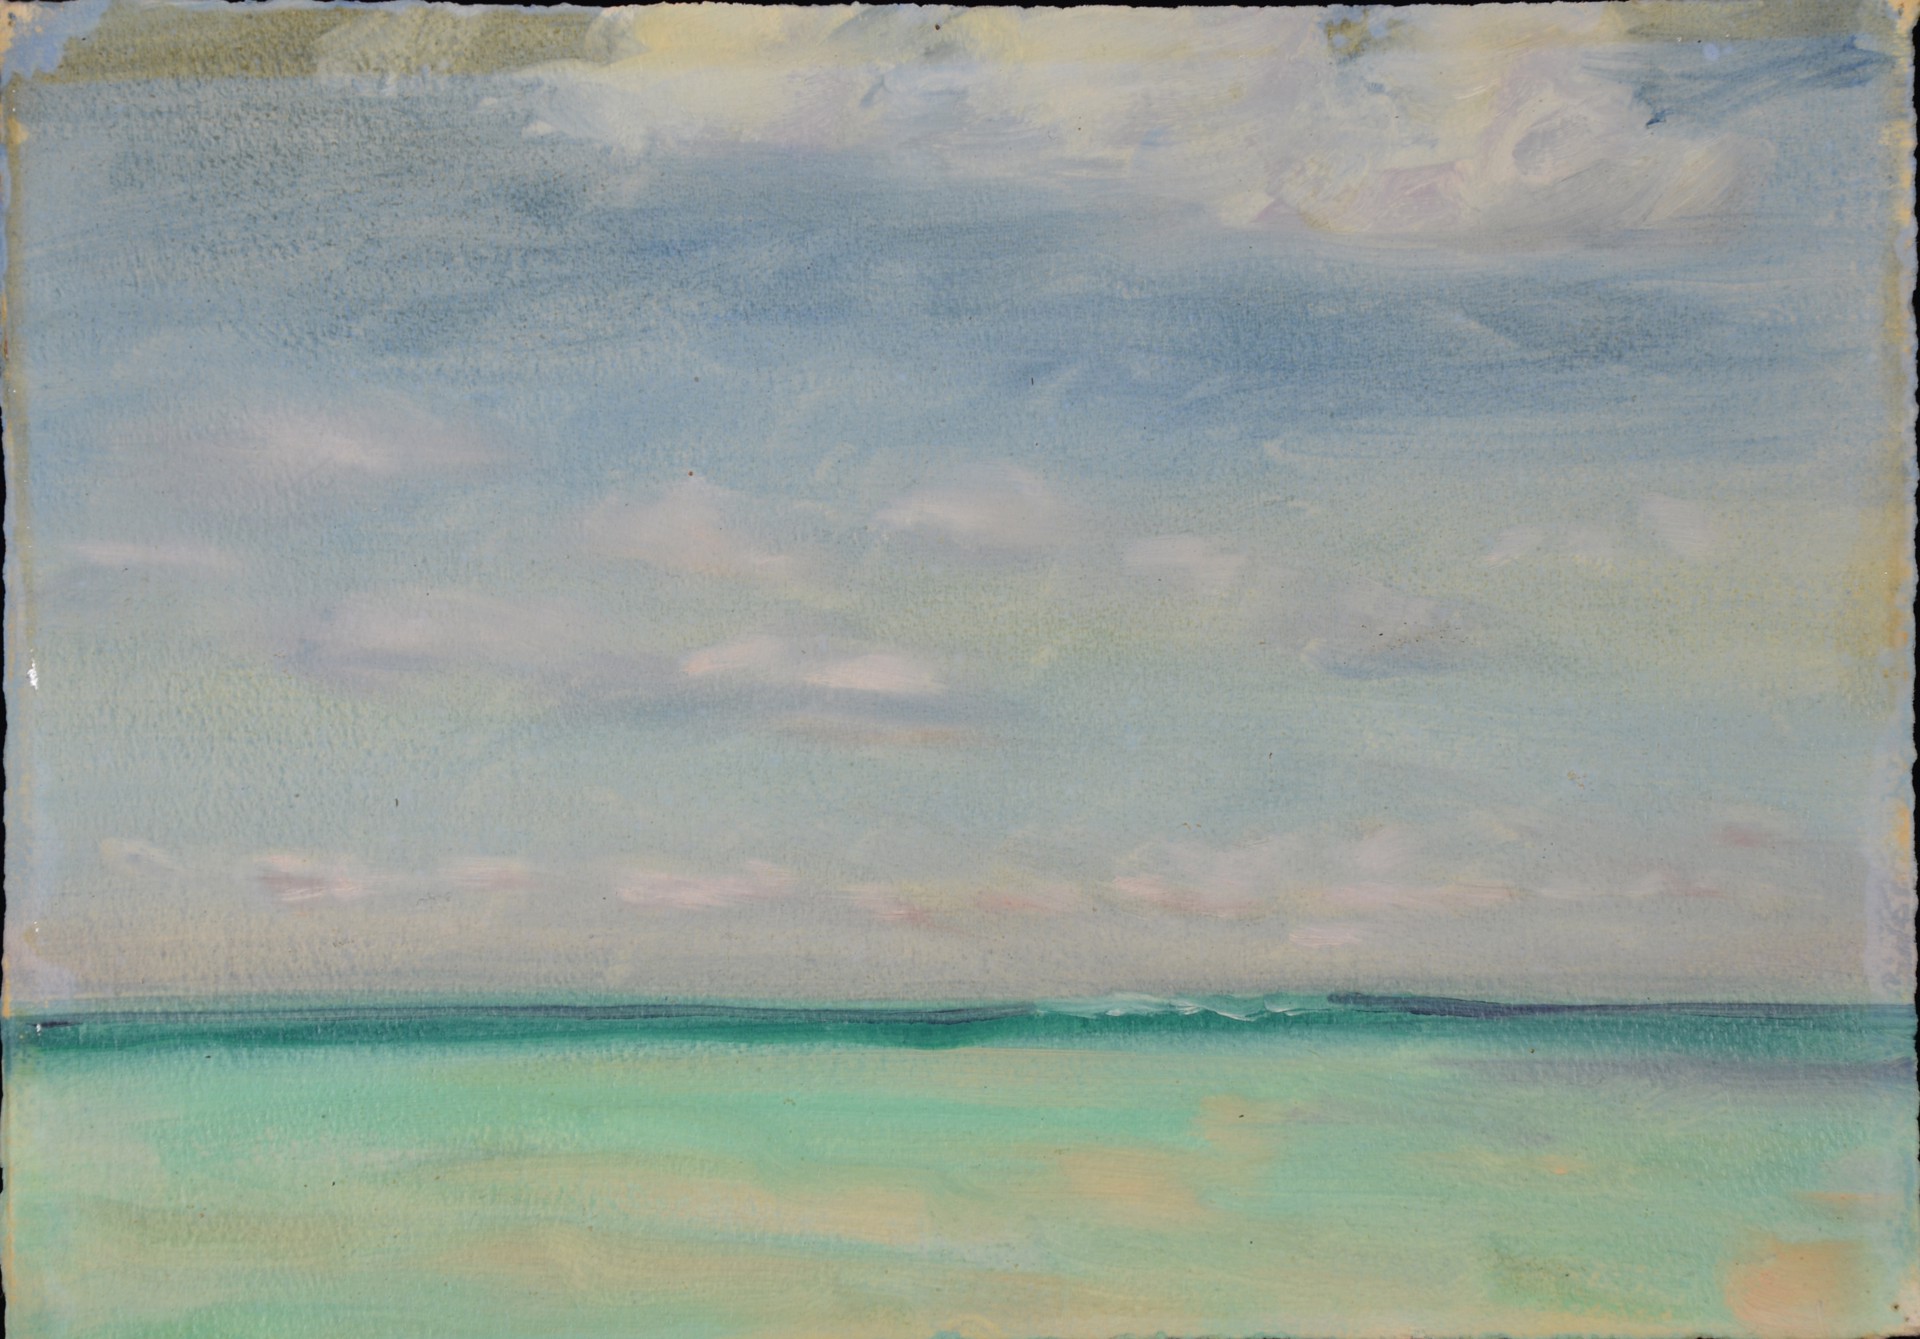 Antigua II by Gail Foster